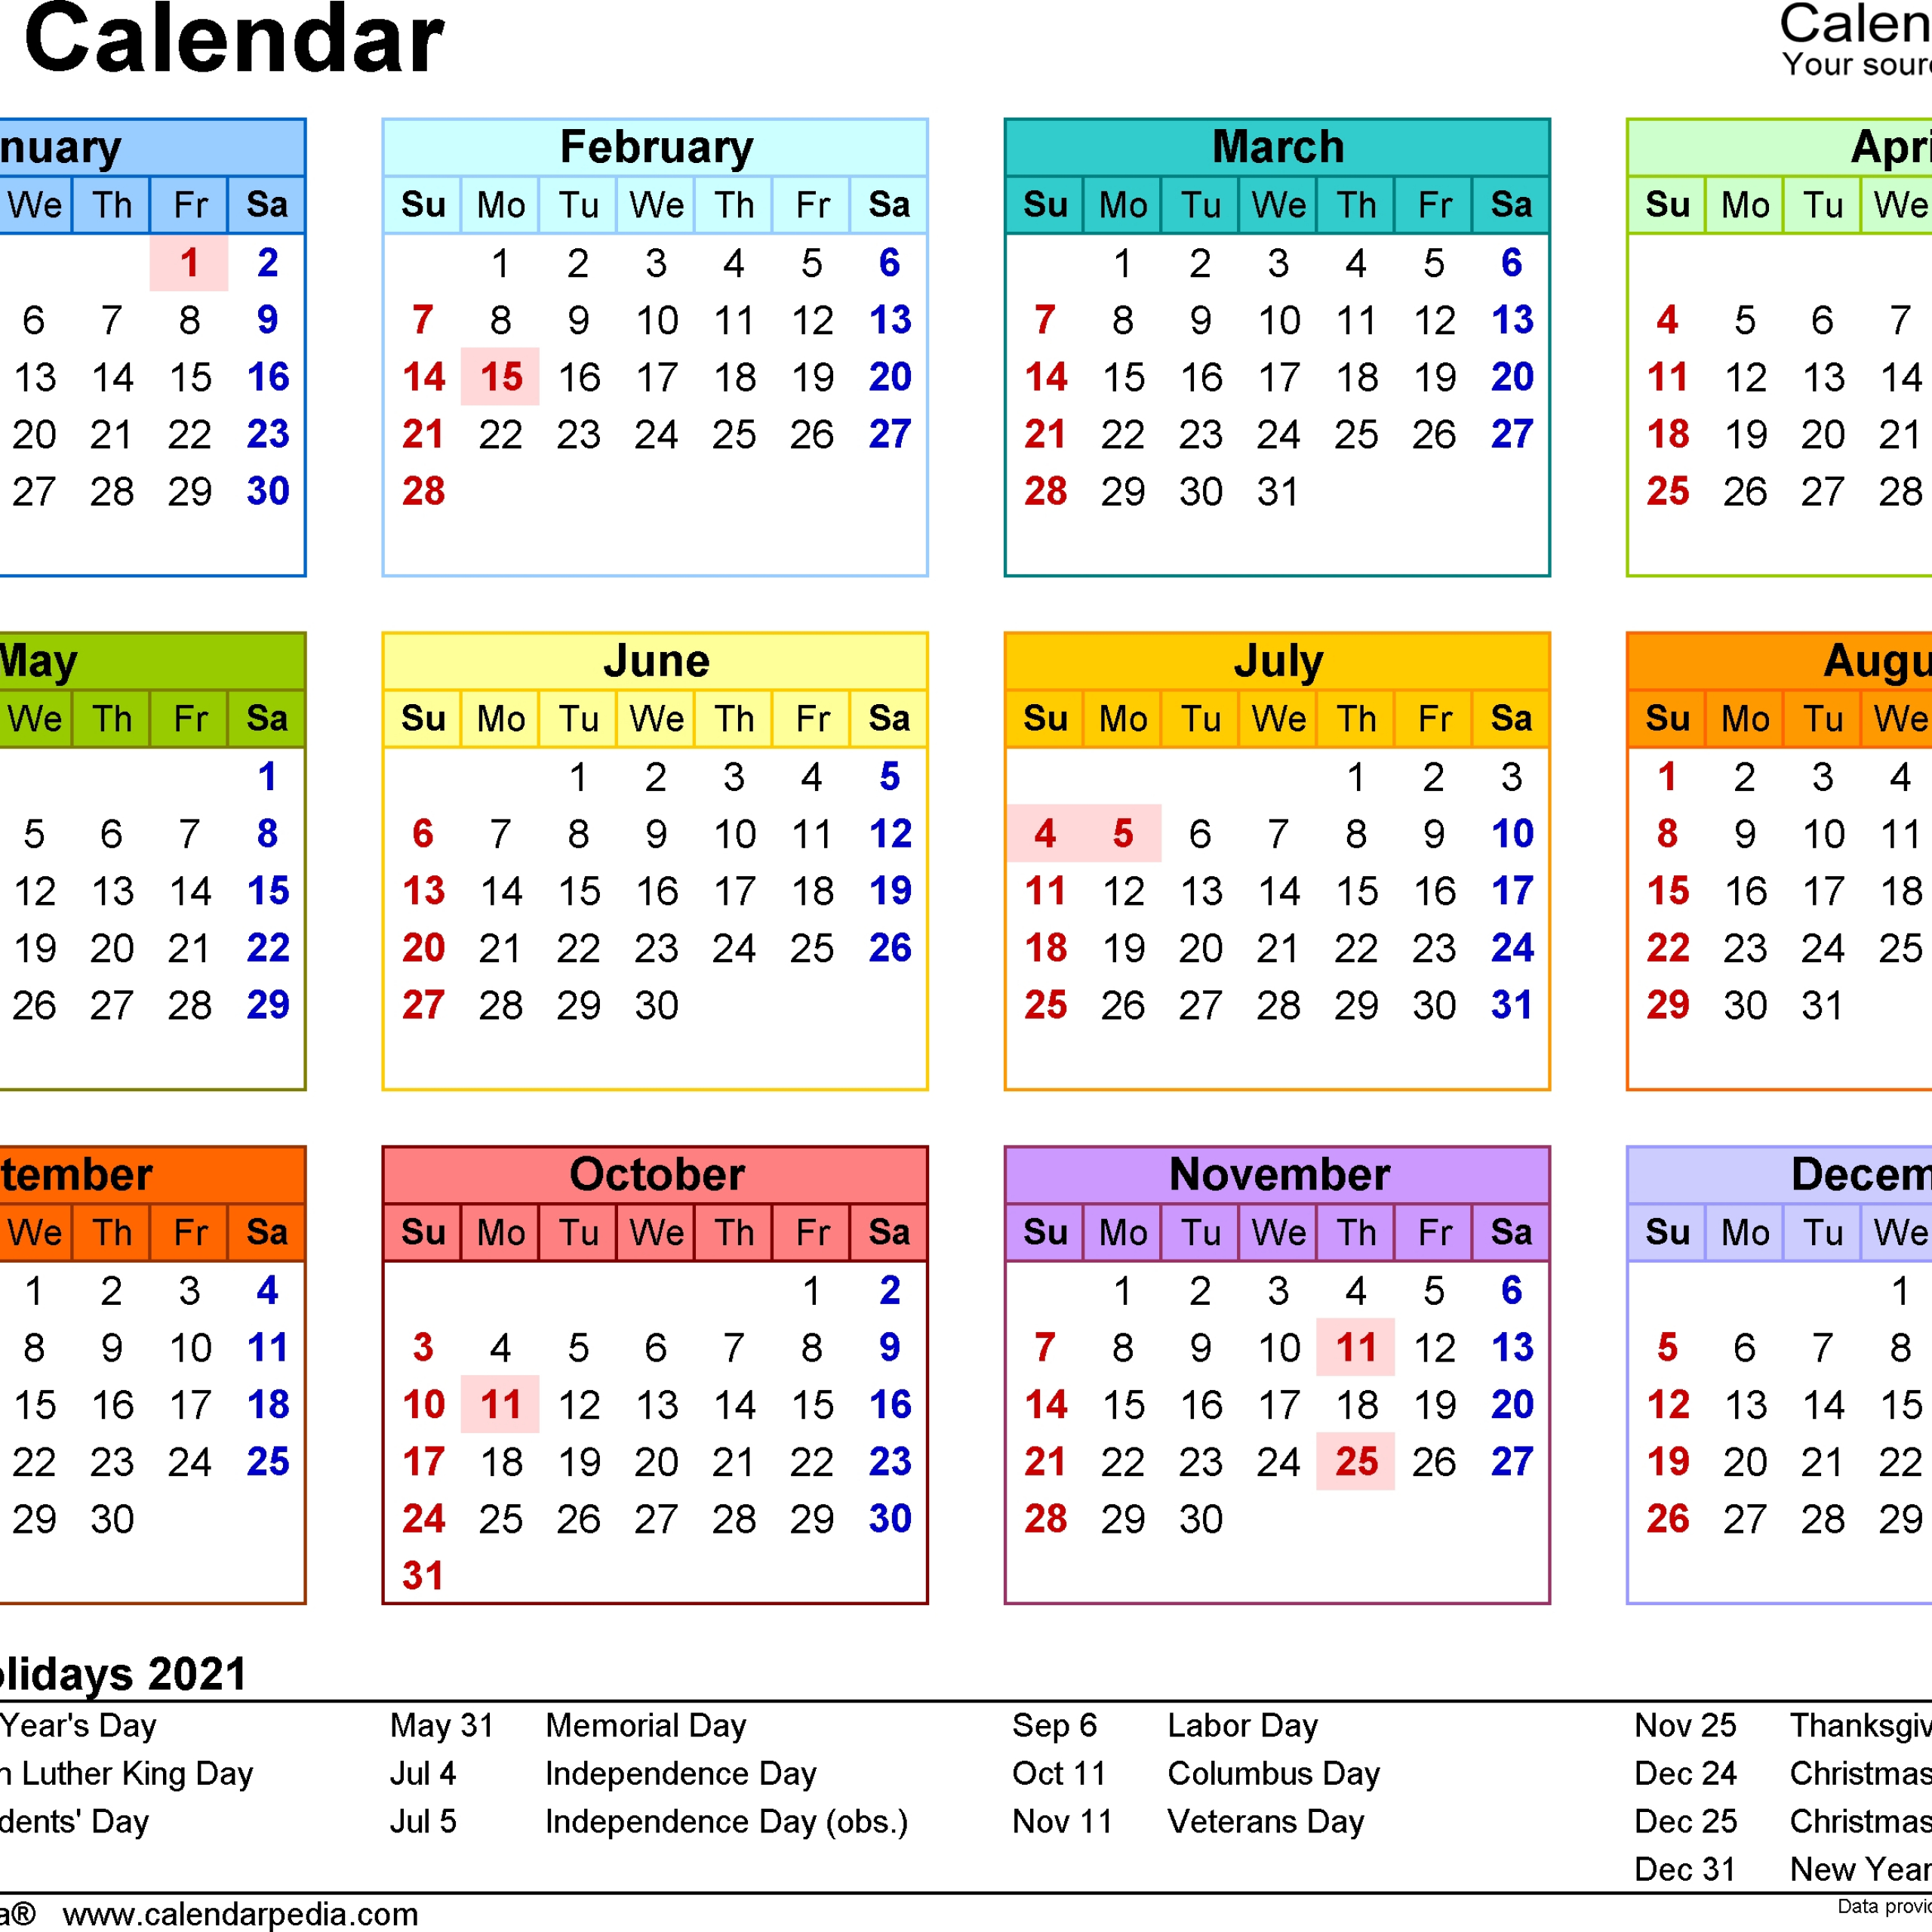 20+ Calendar 2021 With Holidays Printable - Free Download-Download Free 2021 Calendar